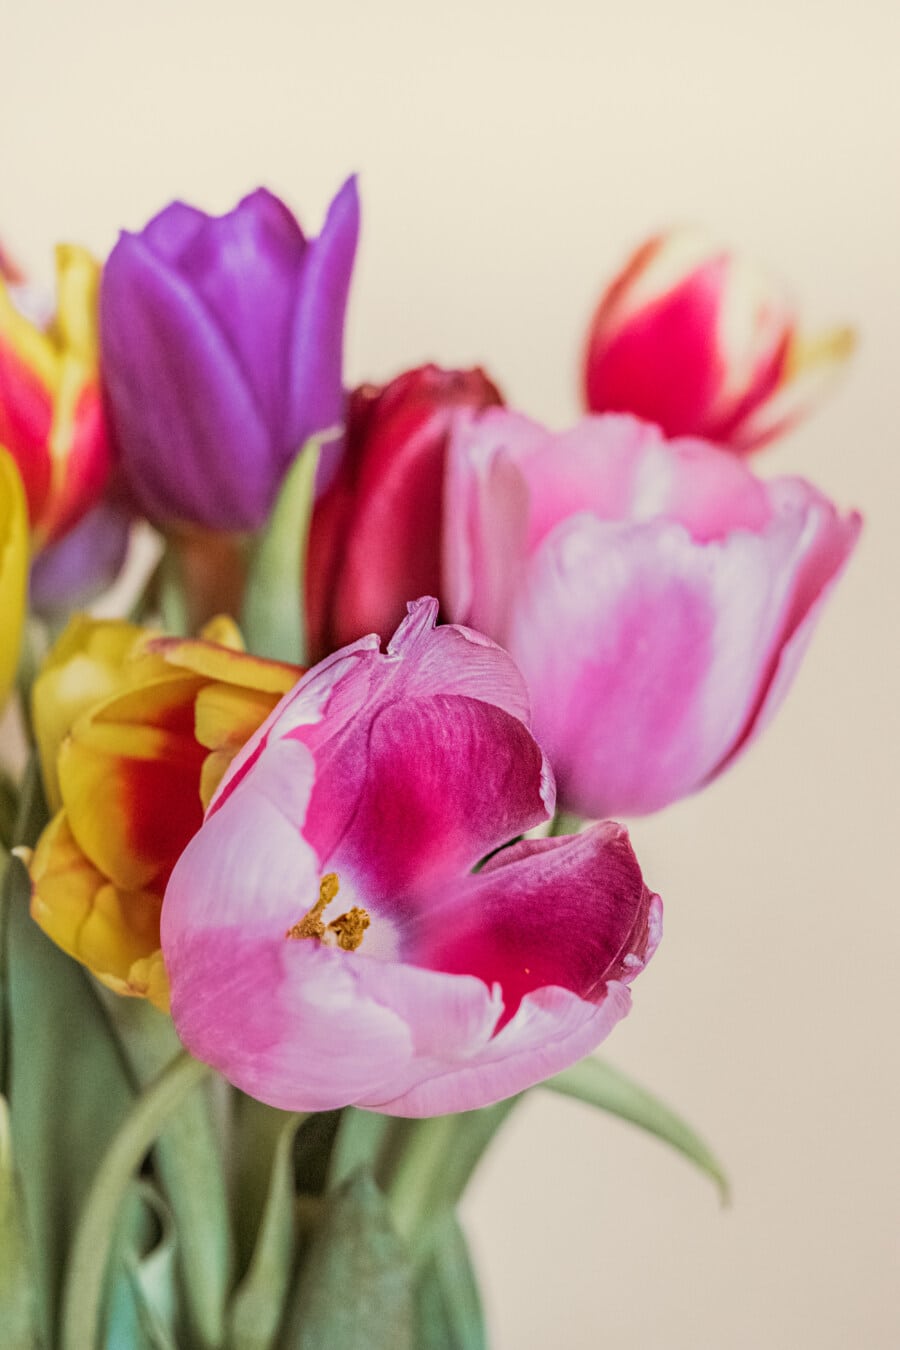 tulips, bouquet, pinkish, petals, cluster, flowers, tulip, spring, flower, blossom